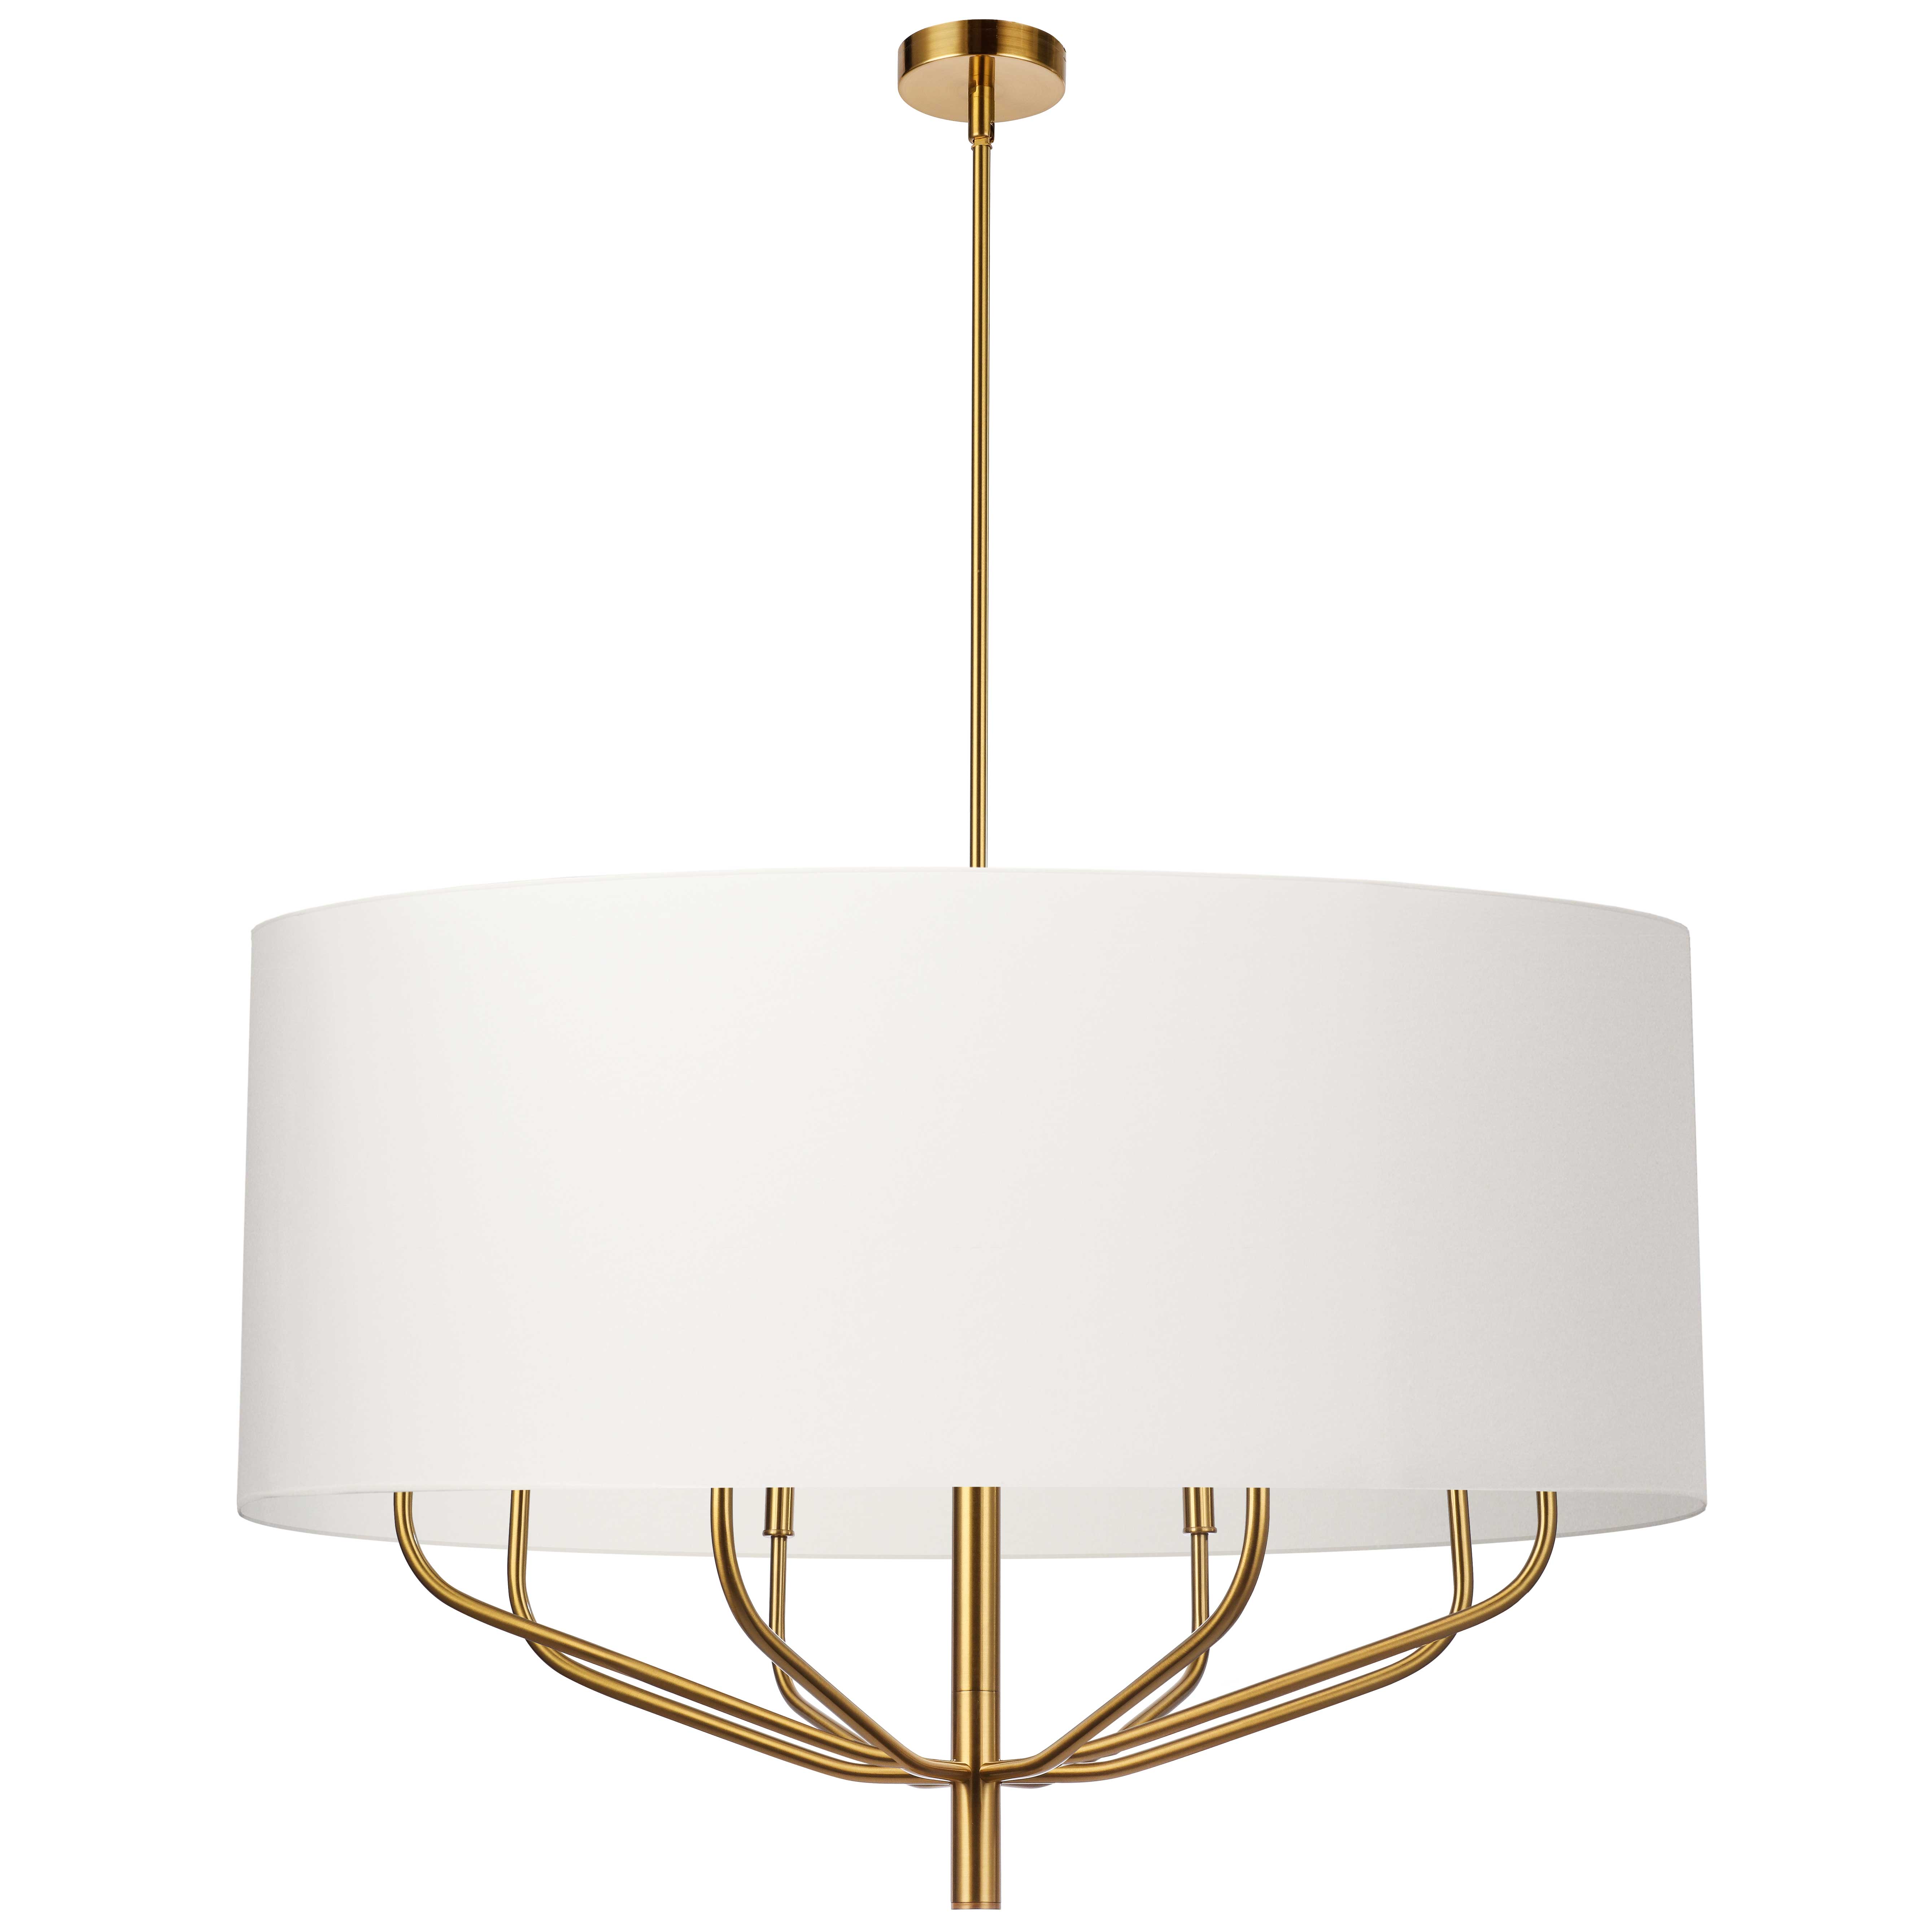 8 Light Incandescent Chandelier, Aged Brass with White Shade